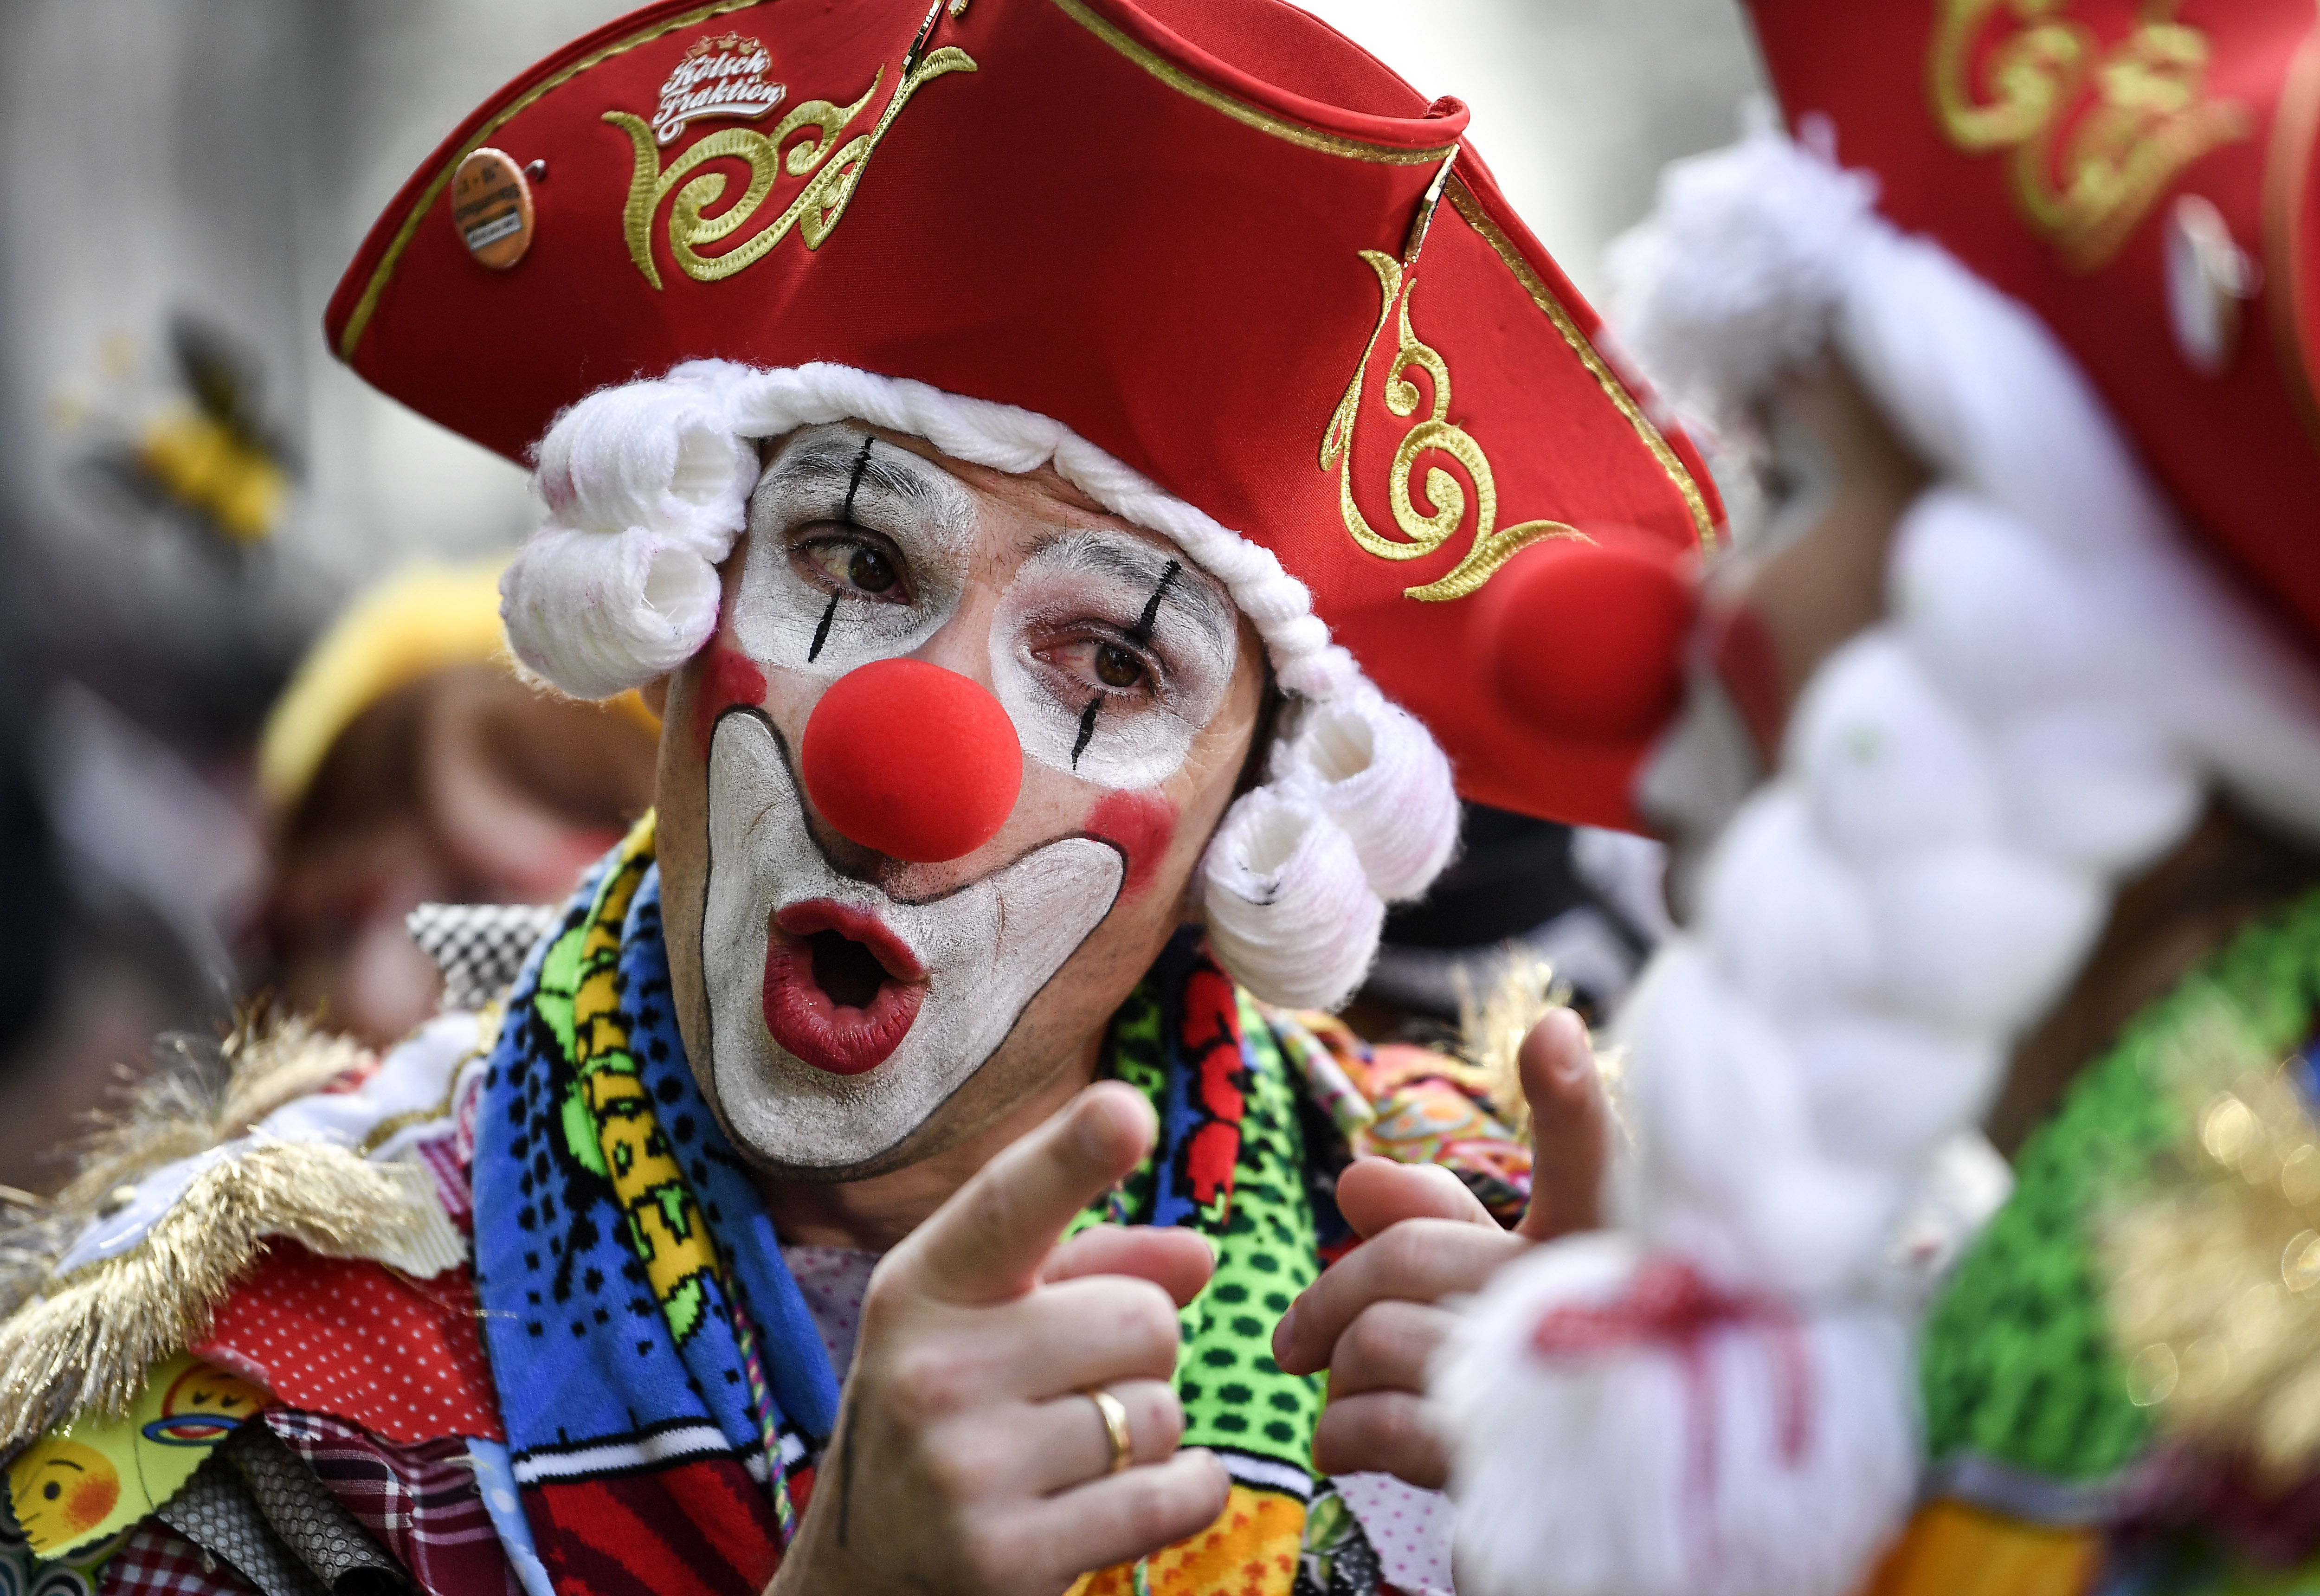 Revelers celebrate in Cologne's city center when thousands of revelers dressed in carnival costumes celebrate the start of the street carnival in Cologne, Germany, Thursday, Feb. 28, 2019. (AP Photo/Martin Meissner)